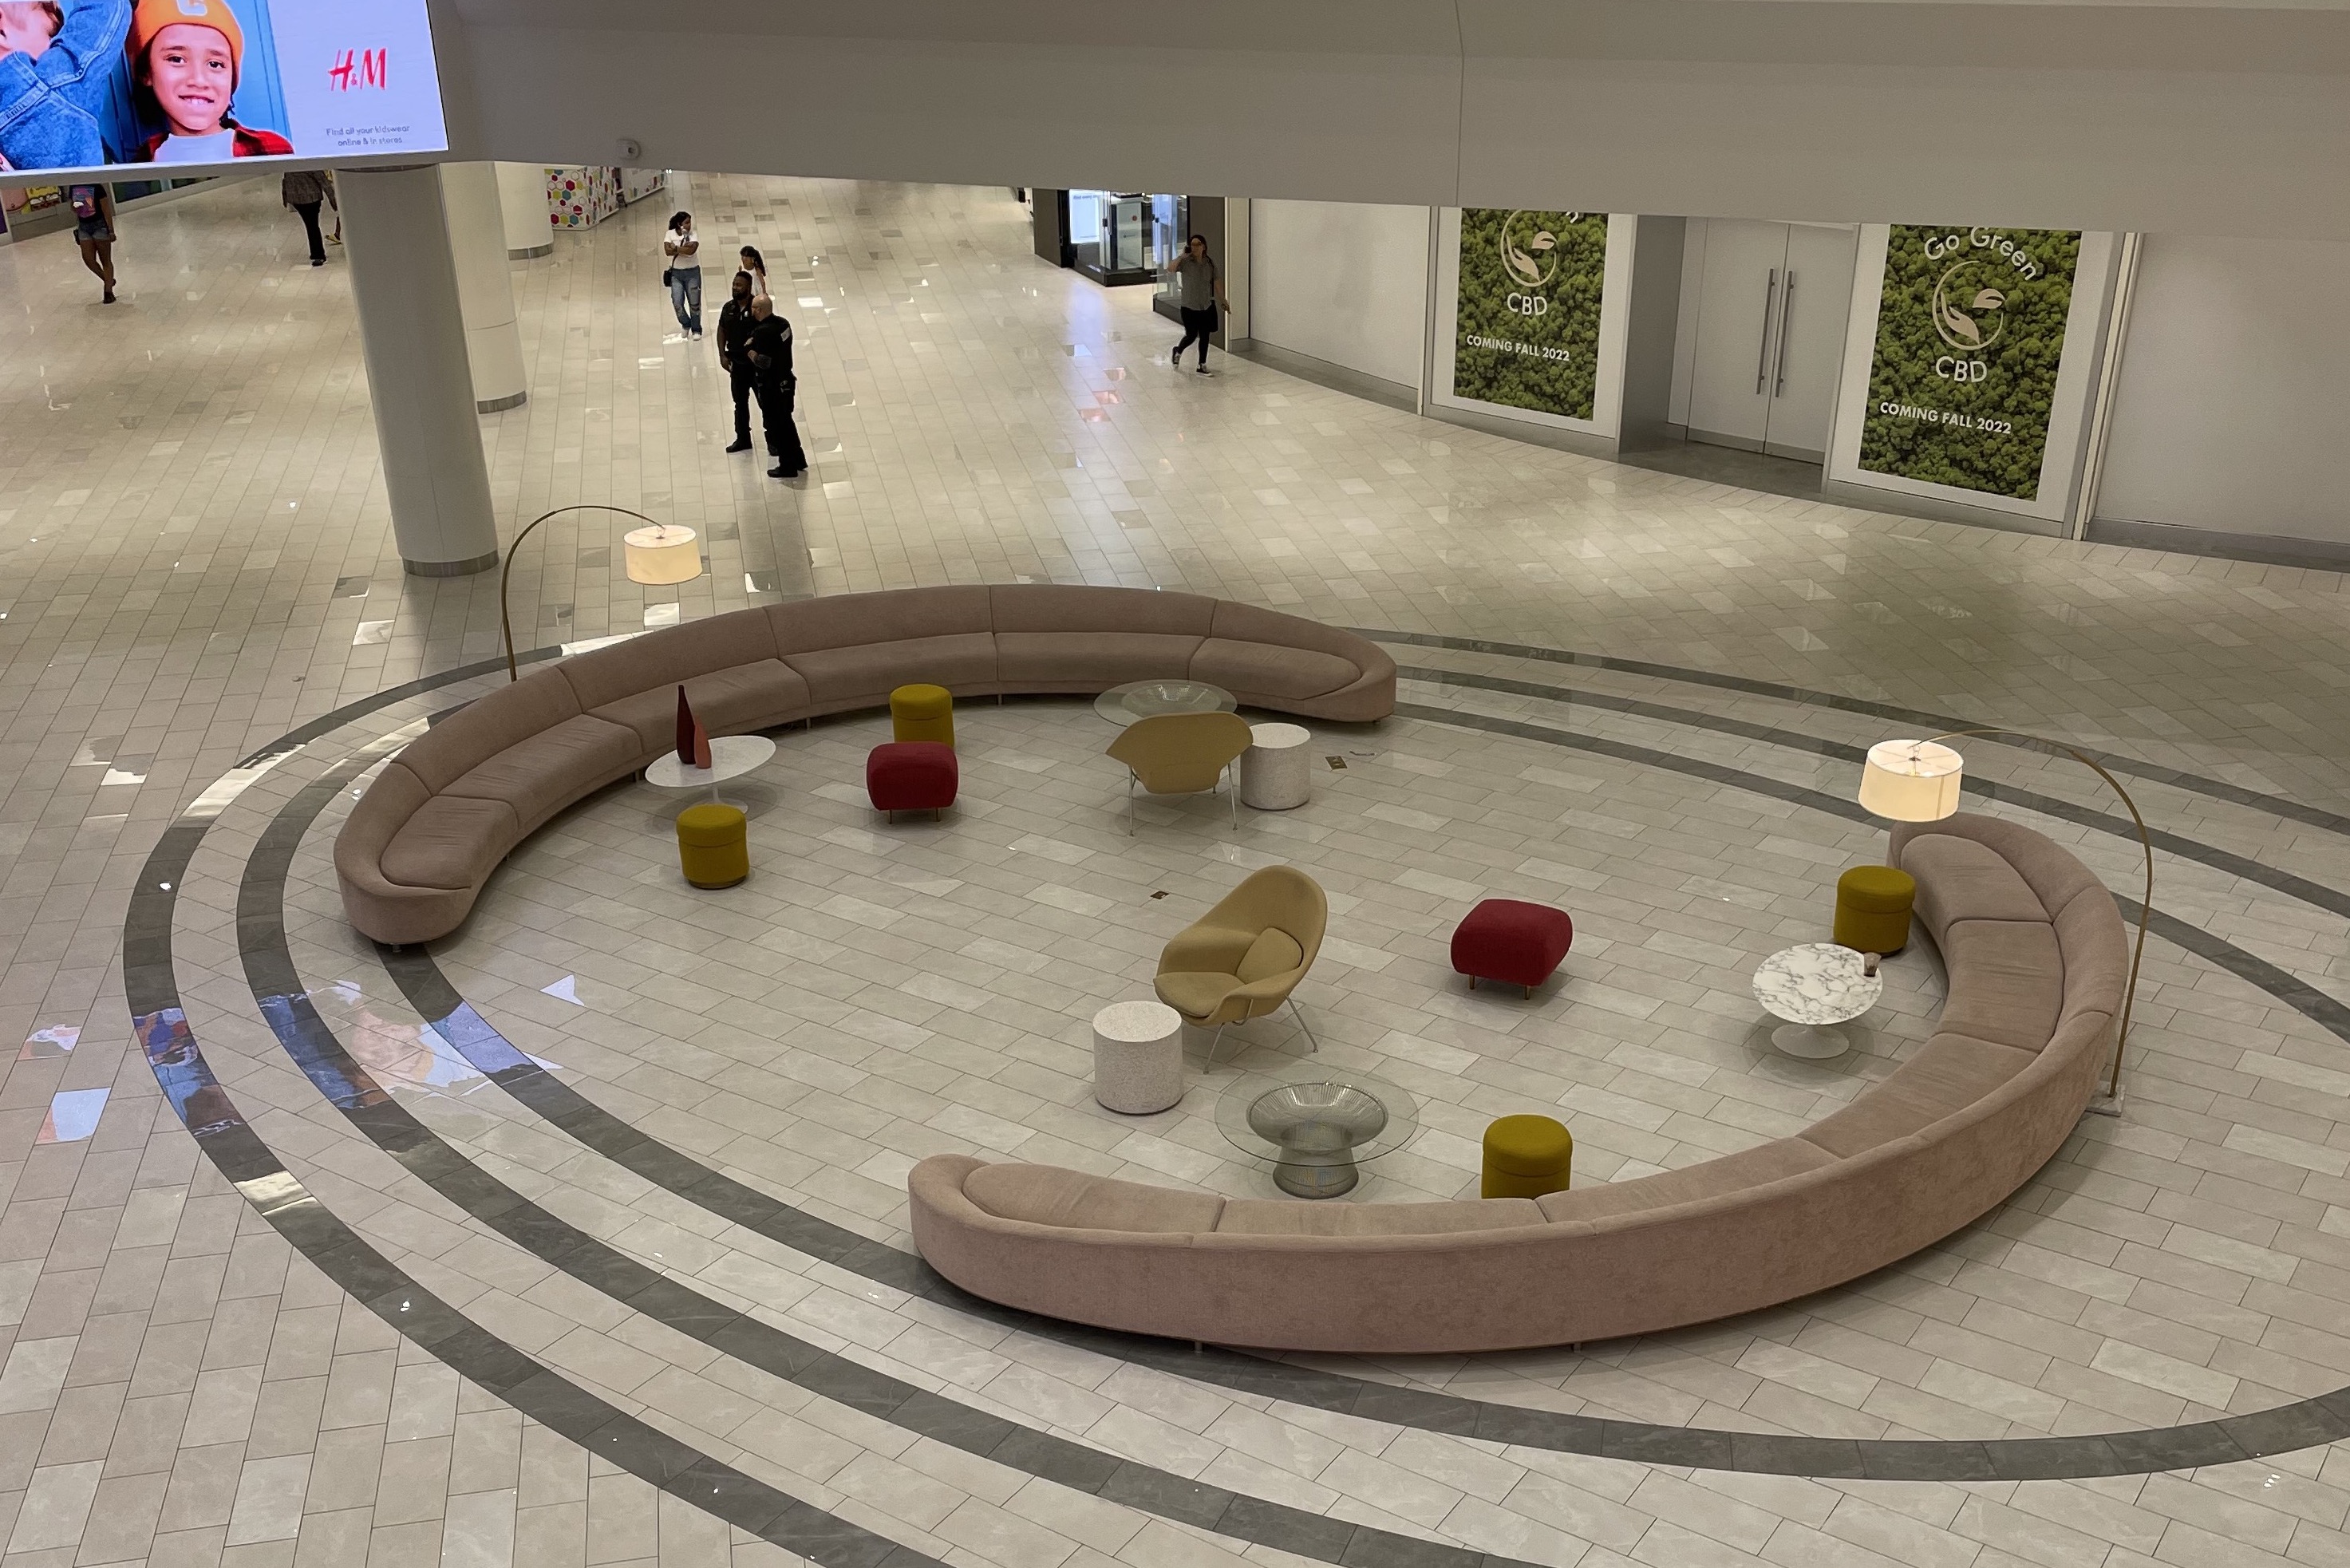 Seen from above, a pastel set of plush furniture—two long, rounded couches and a smattering of chairs and ottomans—dominates the center of a court in what looks to be an indoor retail space with a tiled floor.